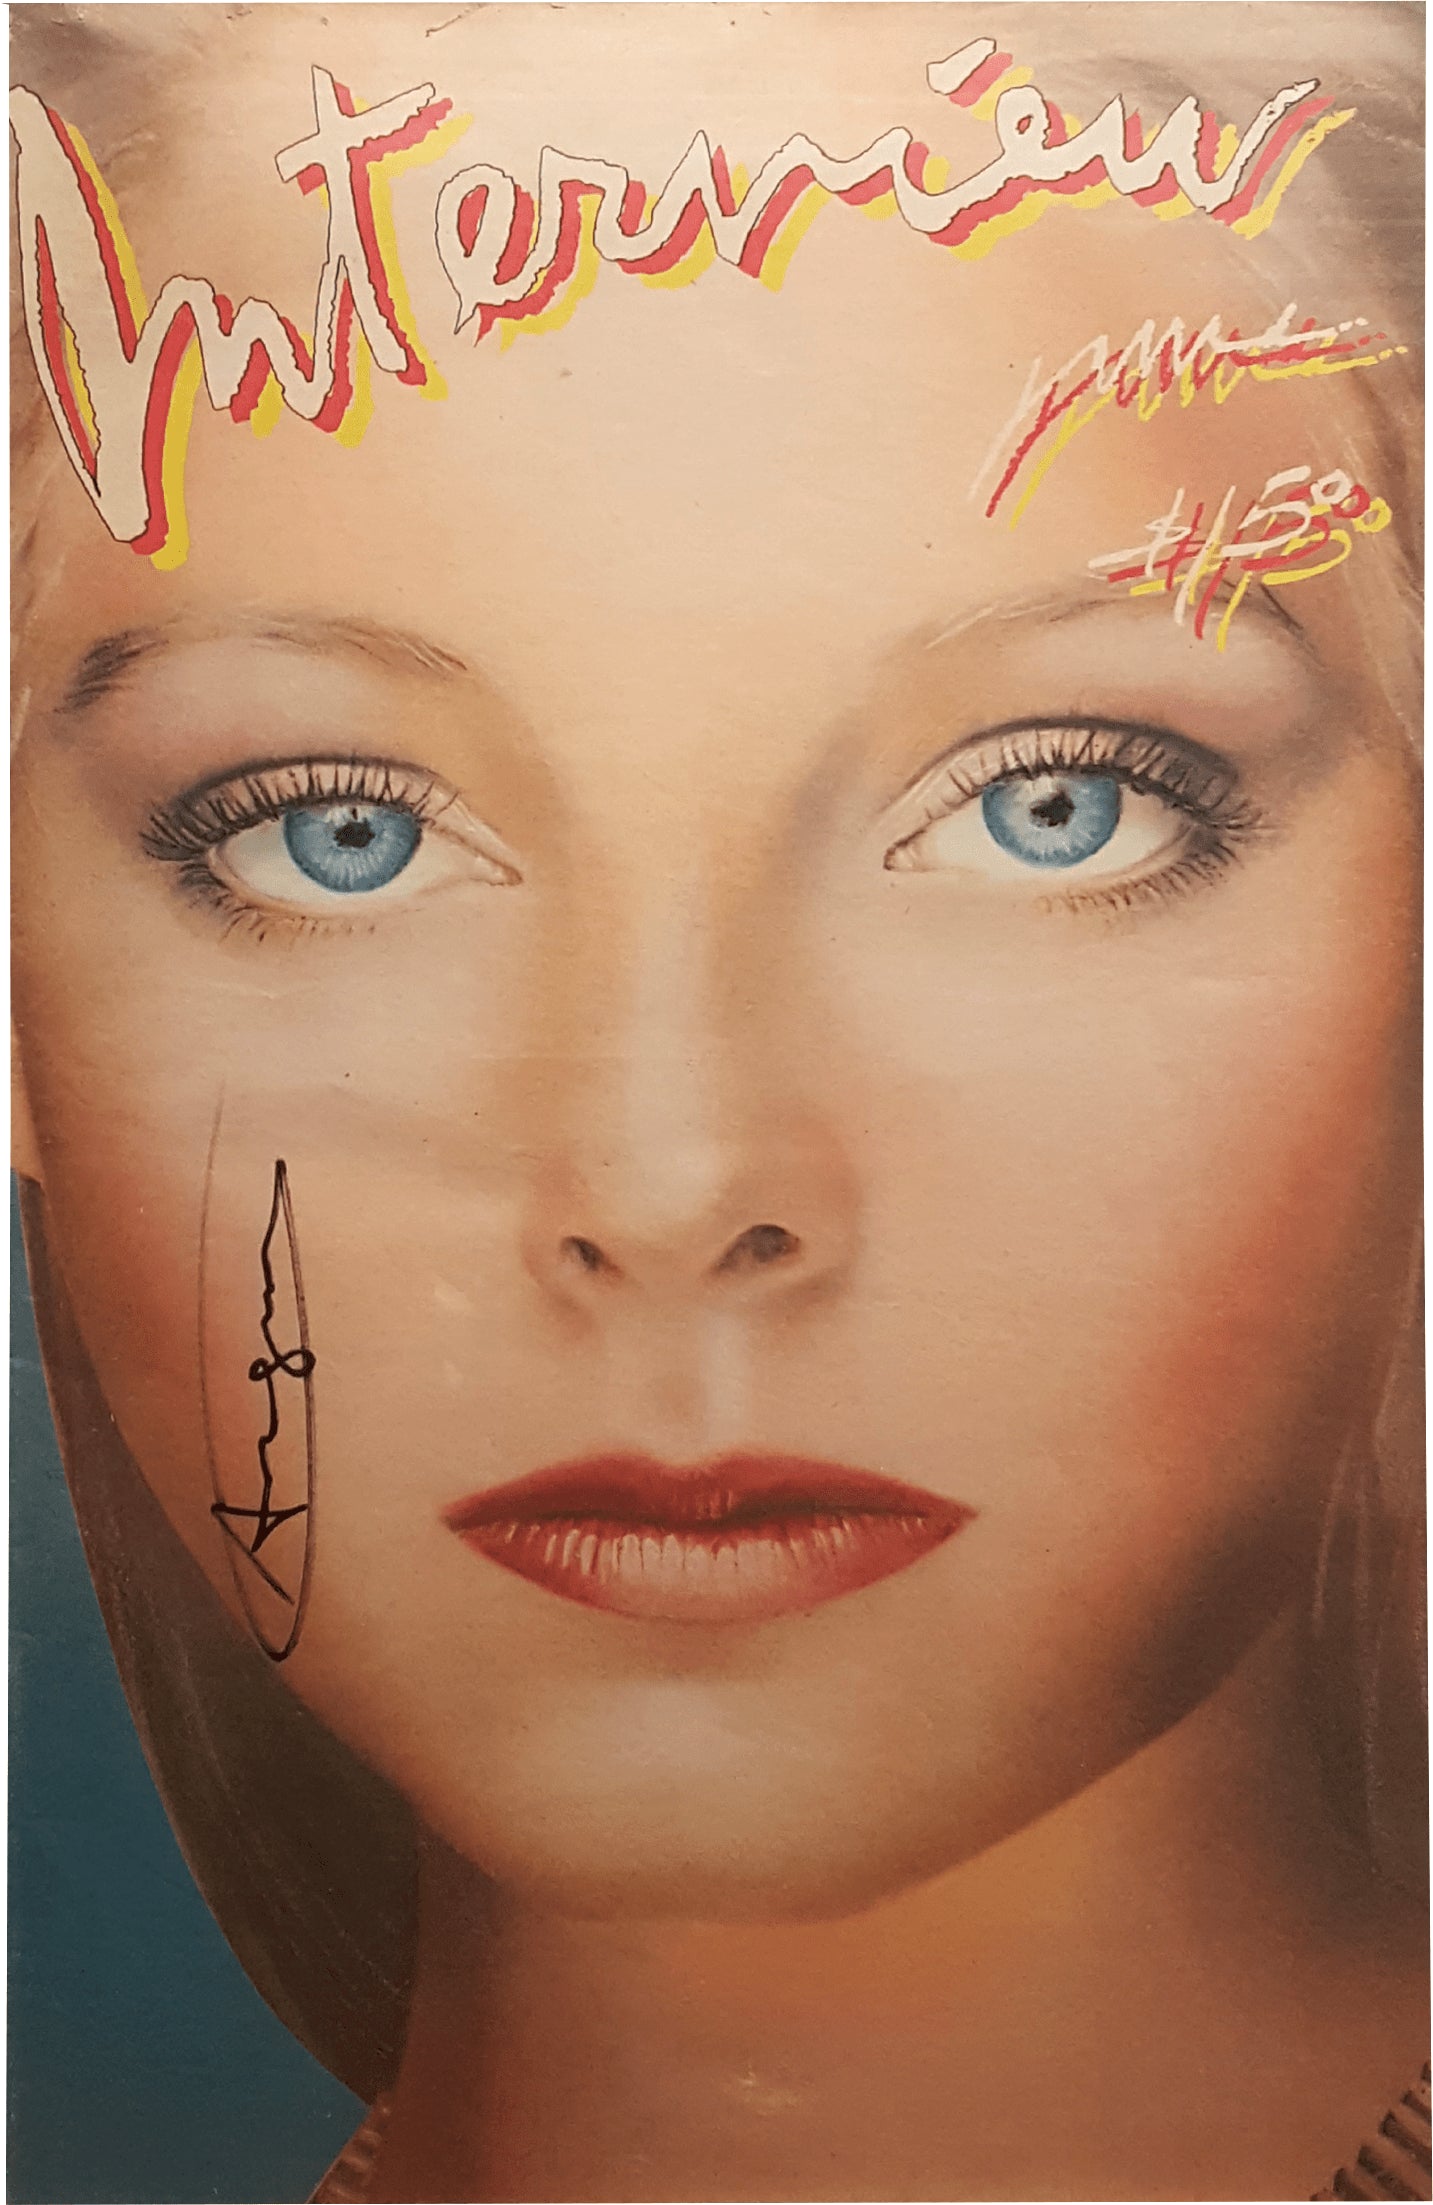 Andy Warhol Interview Magazine (Jodie Foster Cover), Vol. X No. 6 Sept. 1980 Enlarged